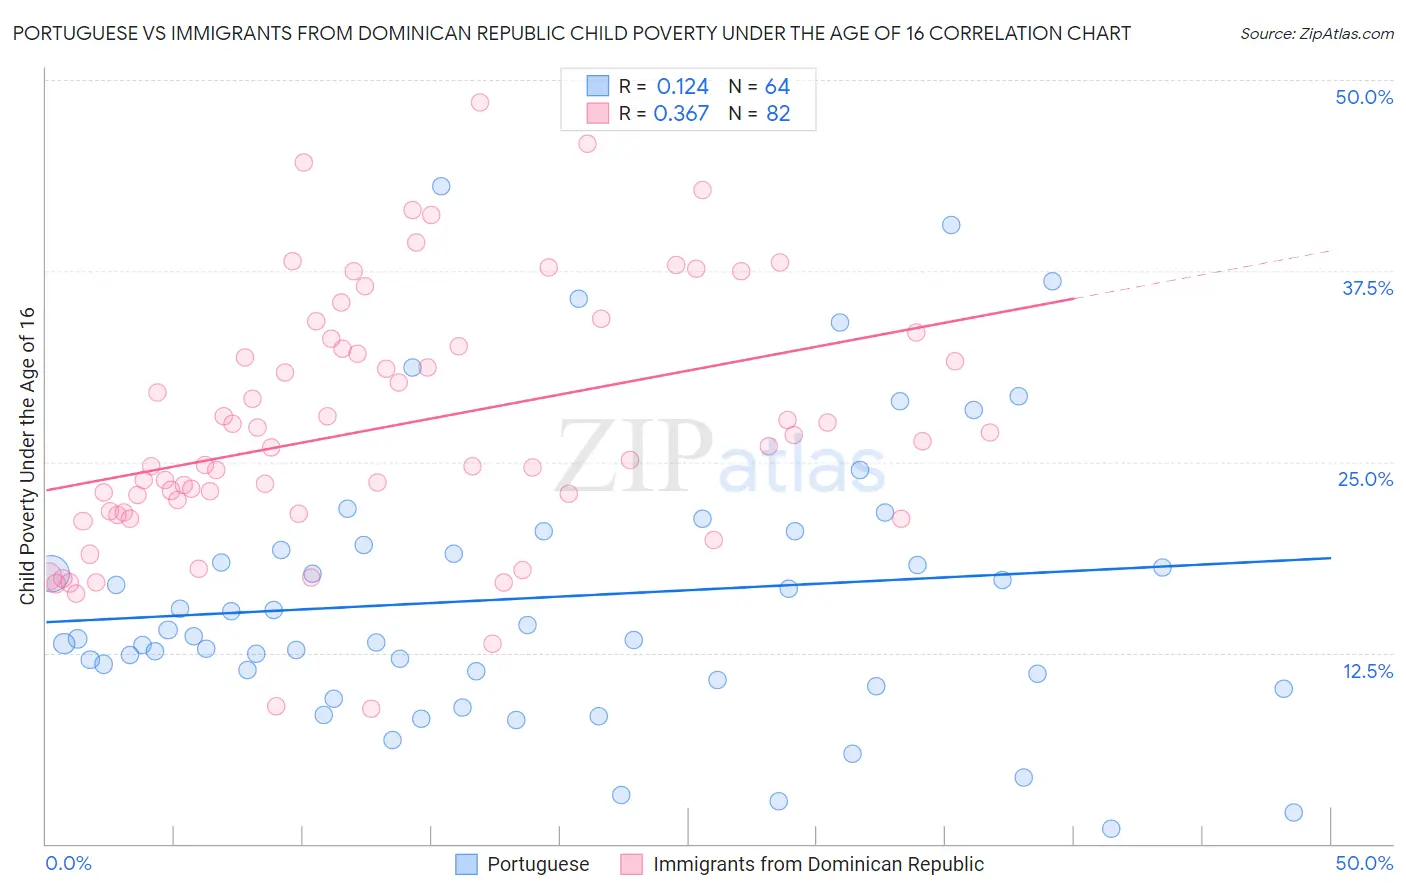 Portuguese vs Immigrants from Dominican Republic Child Poverty Under the Age of 16